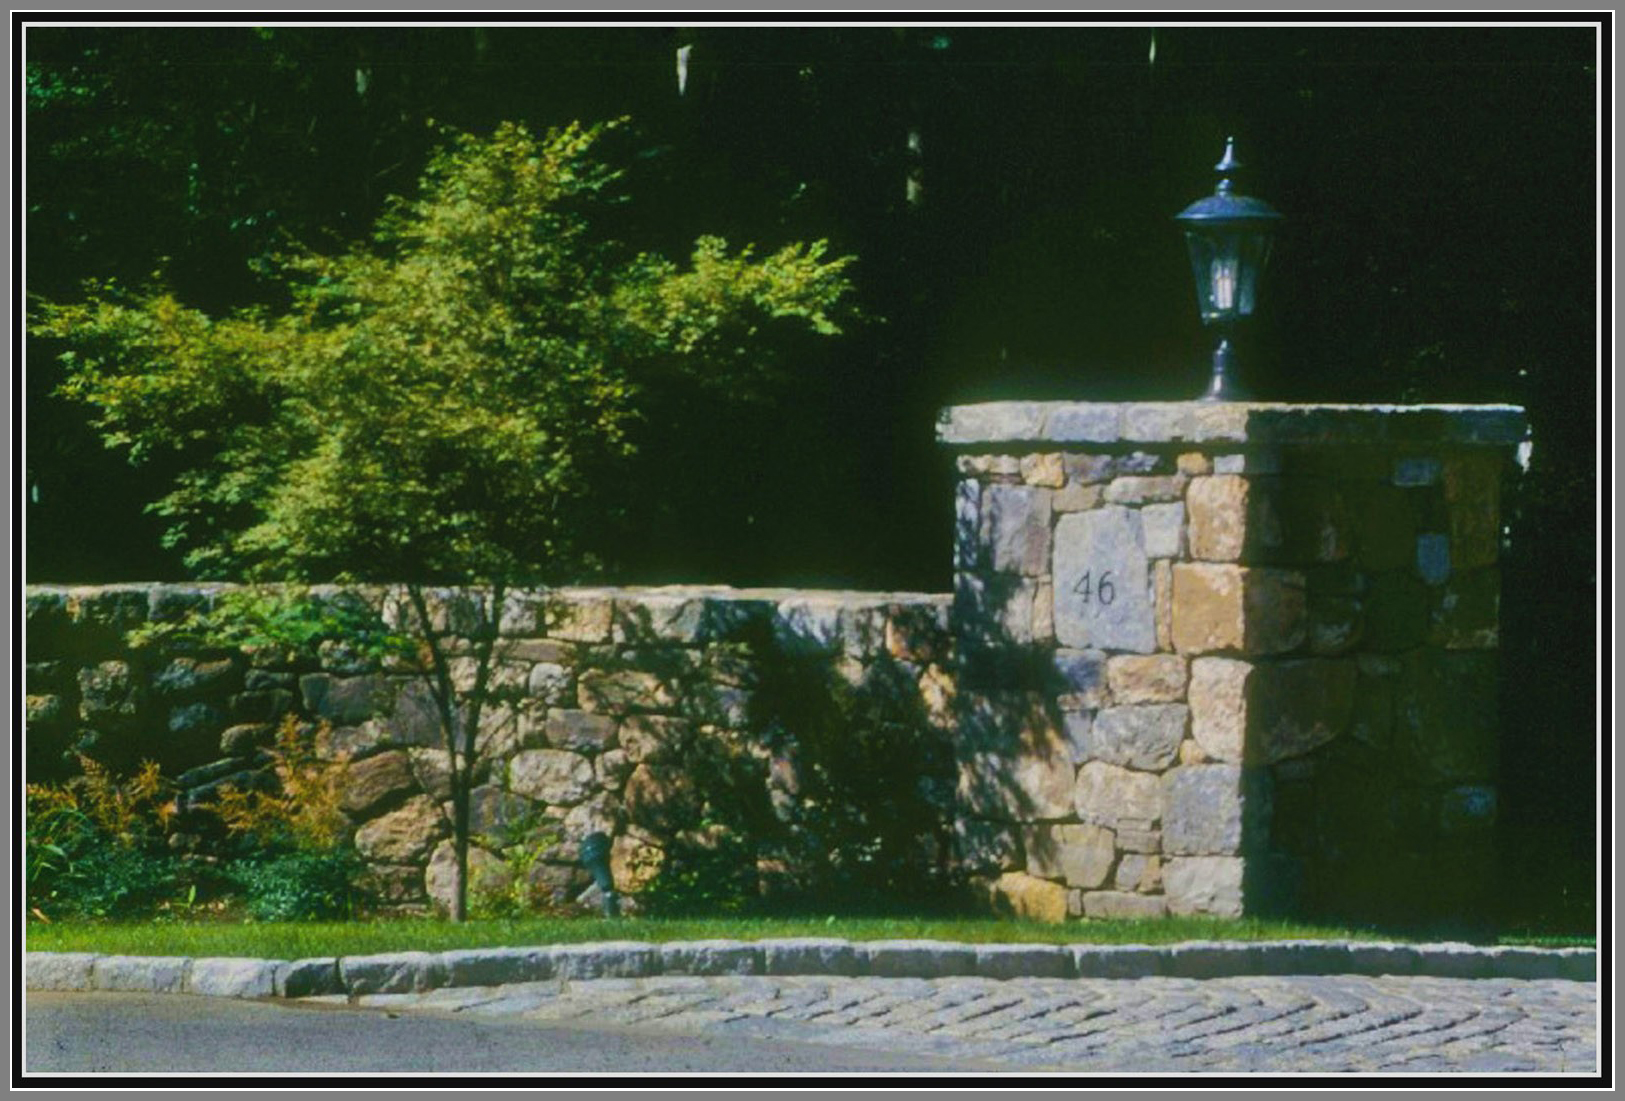 Field stone columns and wall with cobblestone apron and curb